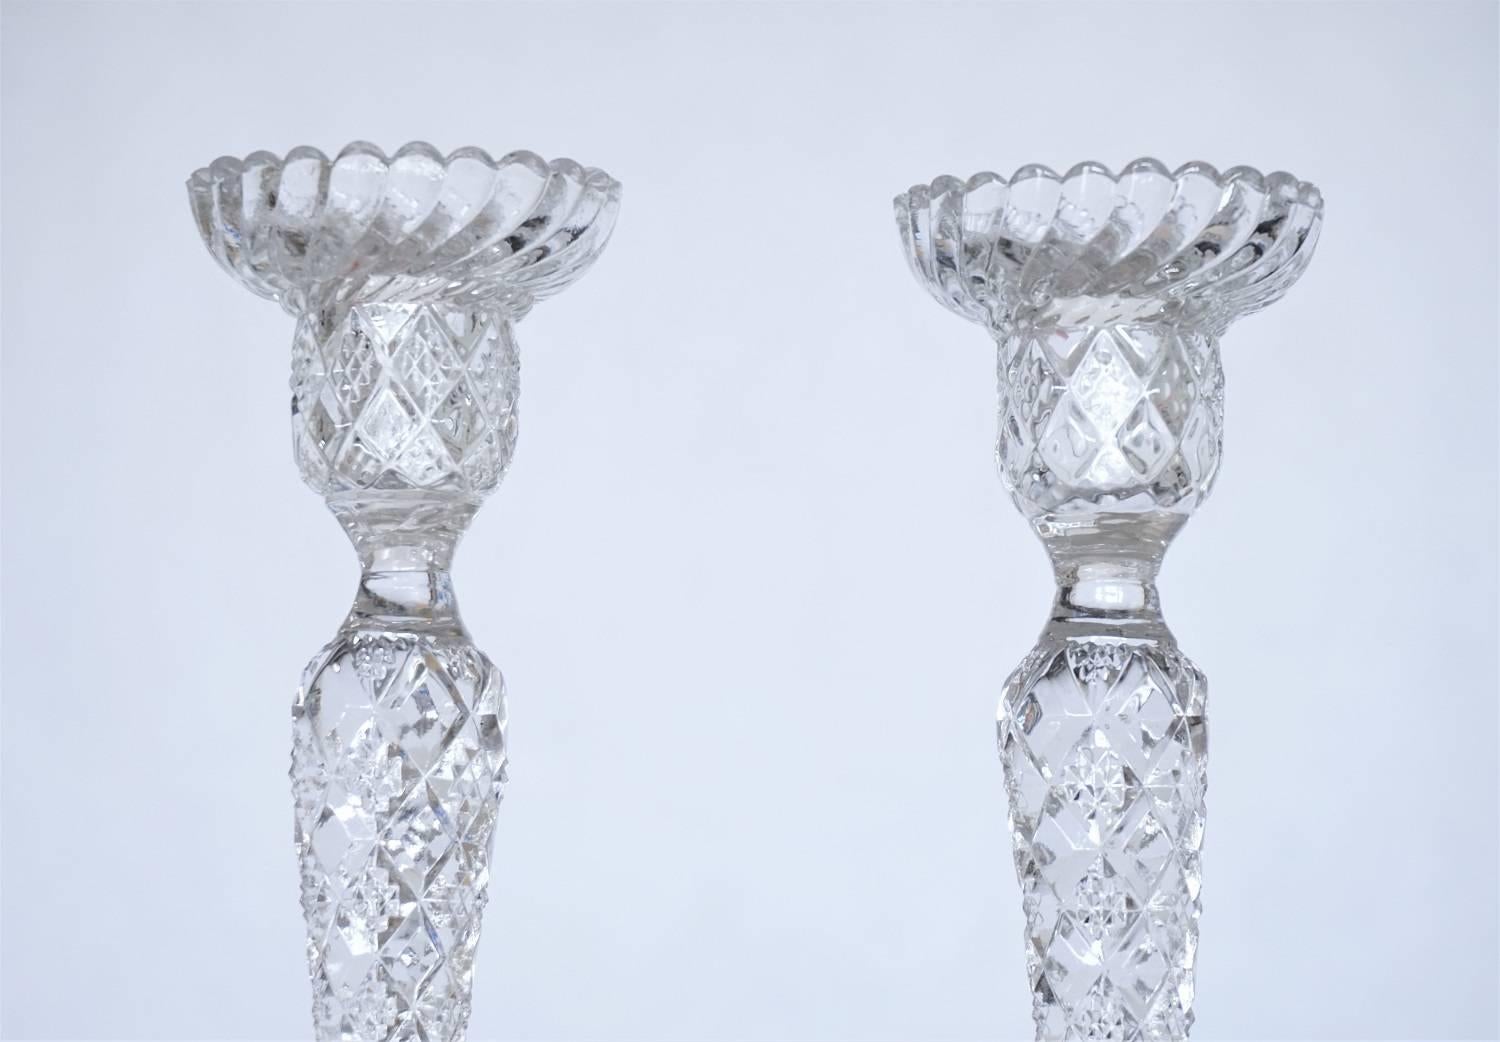 Molded Antique German Pair of Meisenthal Crystal Candlesticks Candleholders, circa 1907